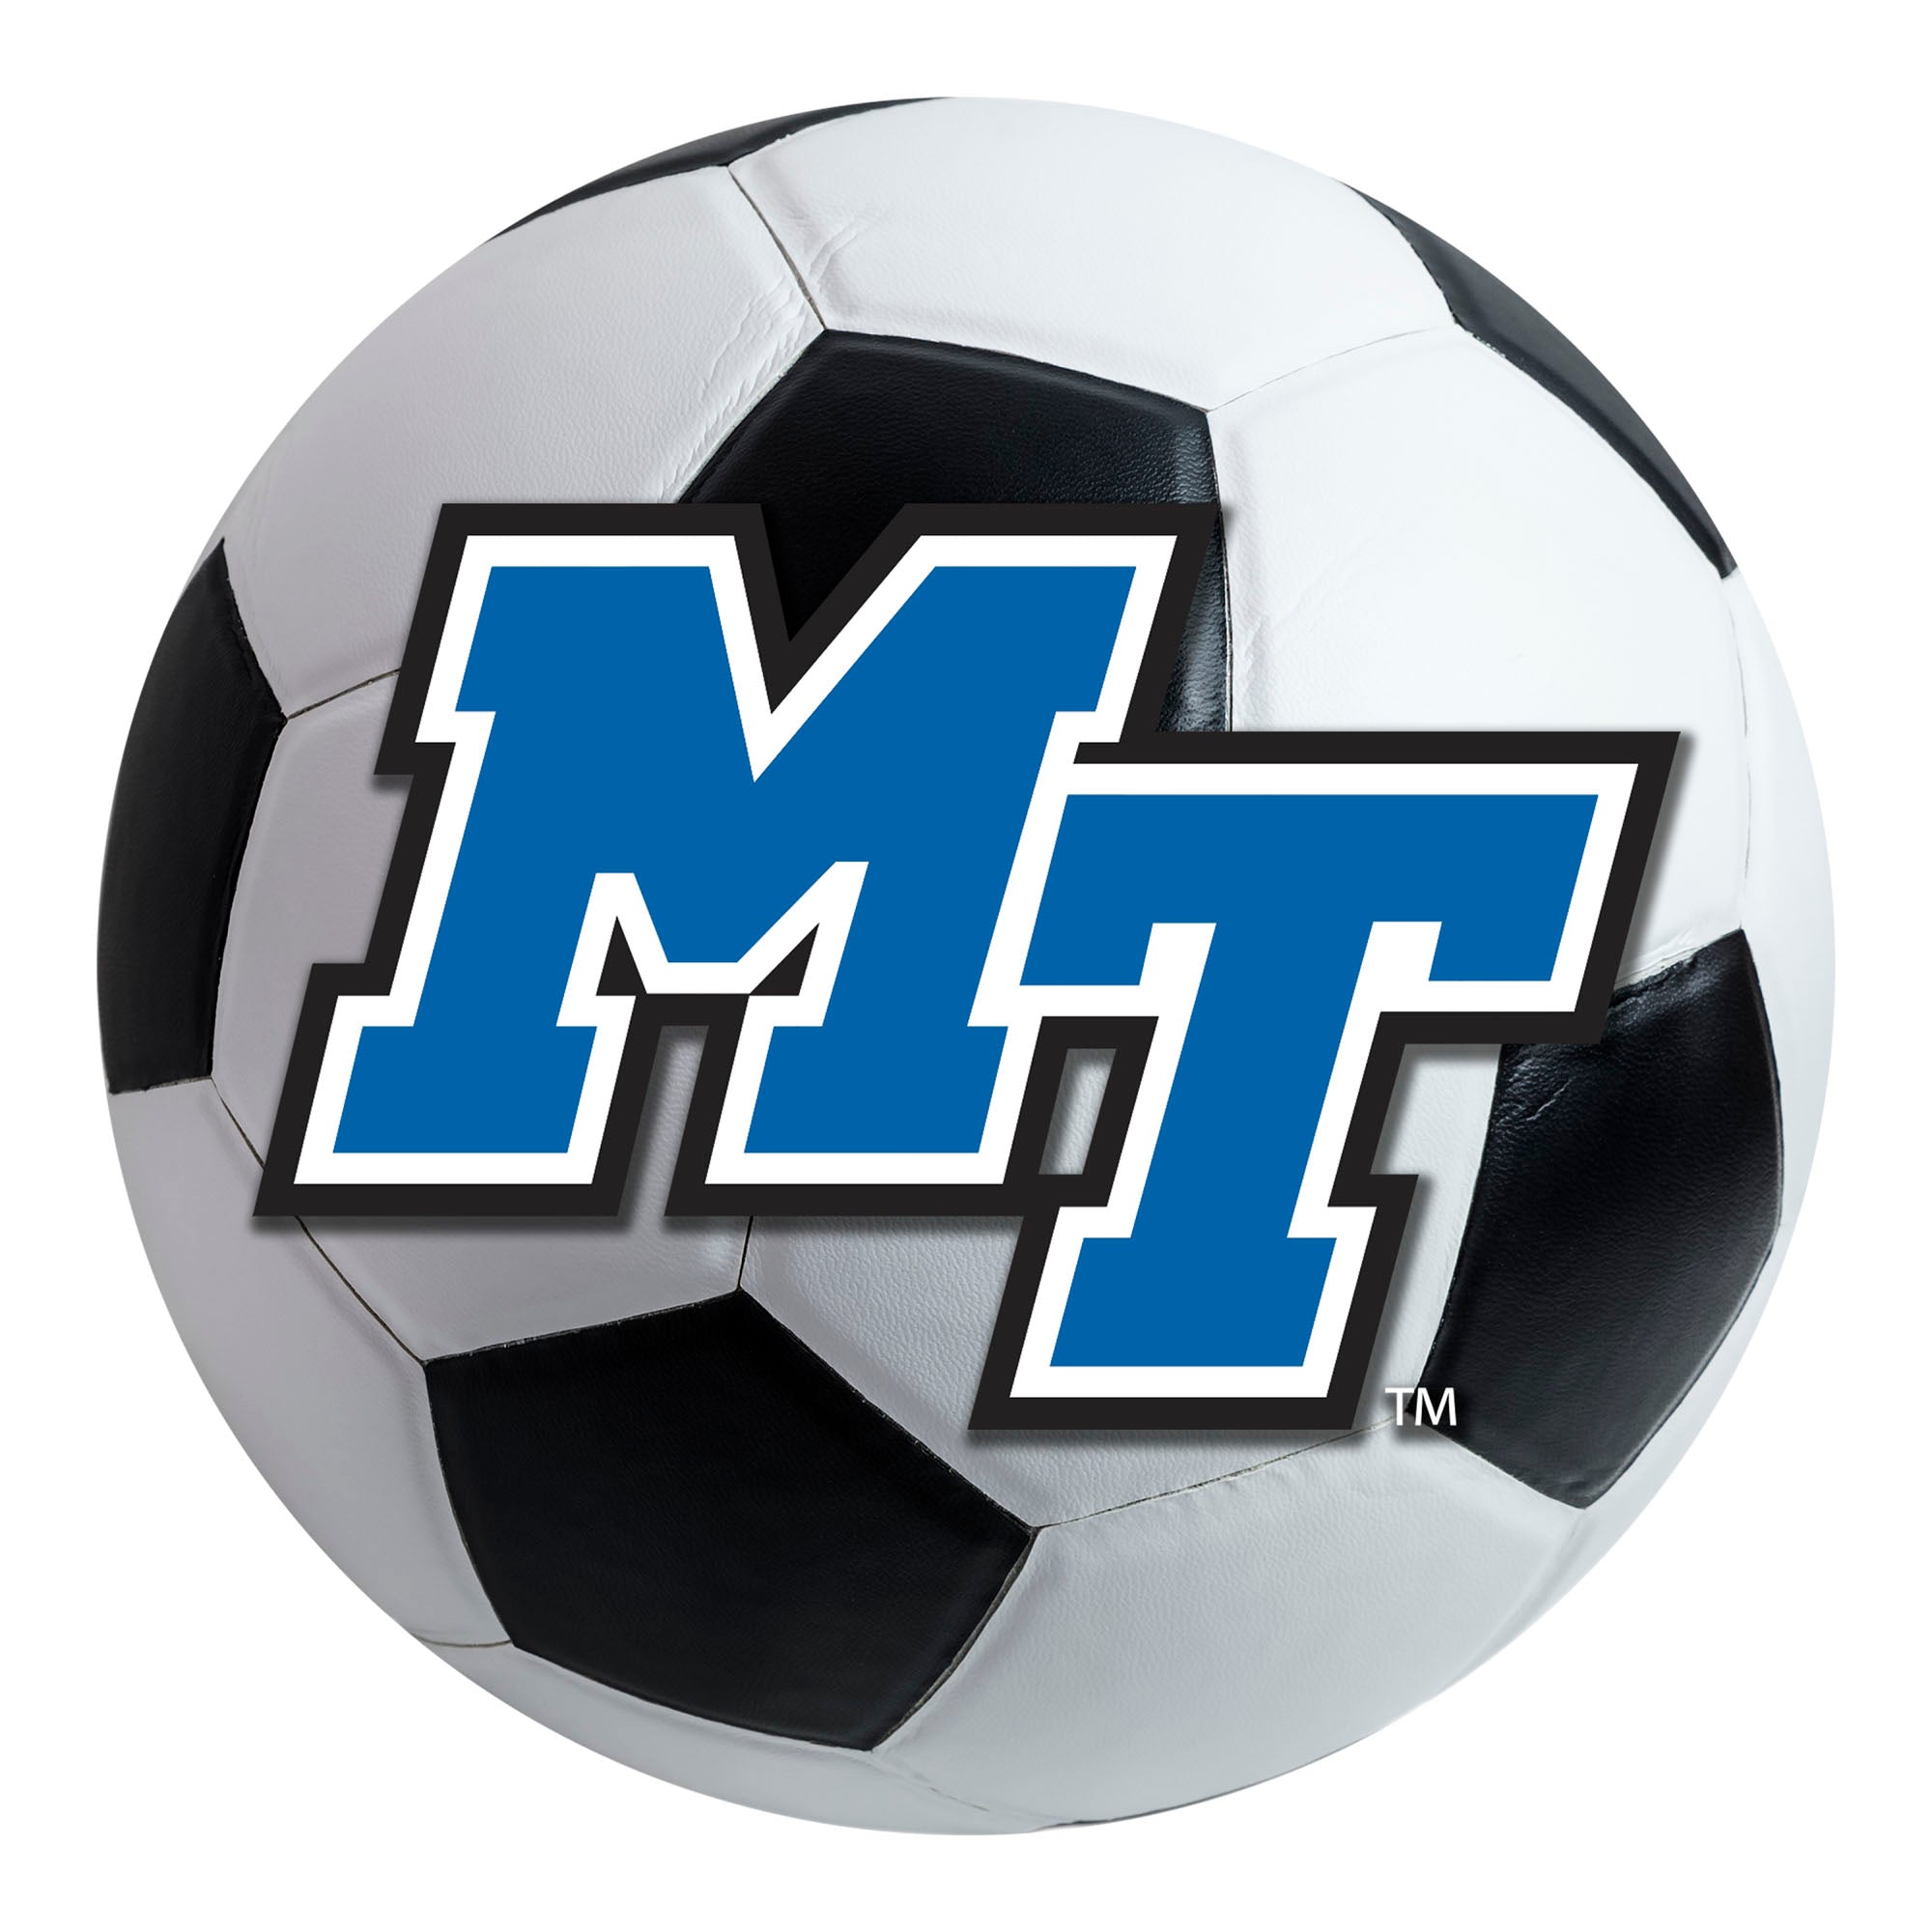 FANMATS, Middle Tennessee State University Soccer Ball Rug - 27in. Diameter